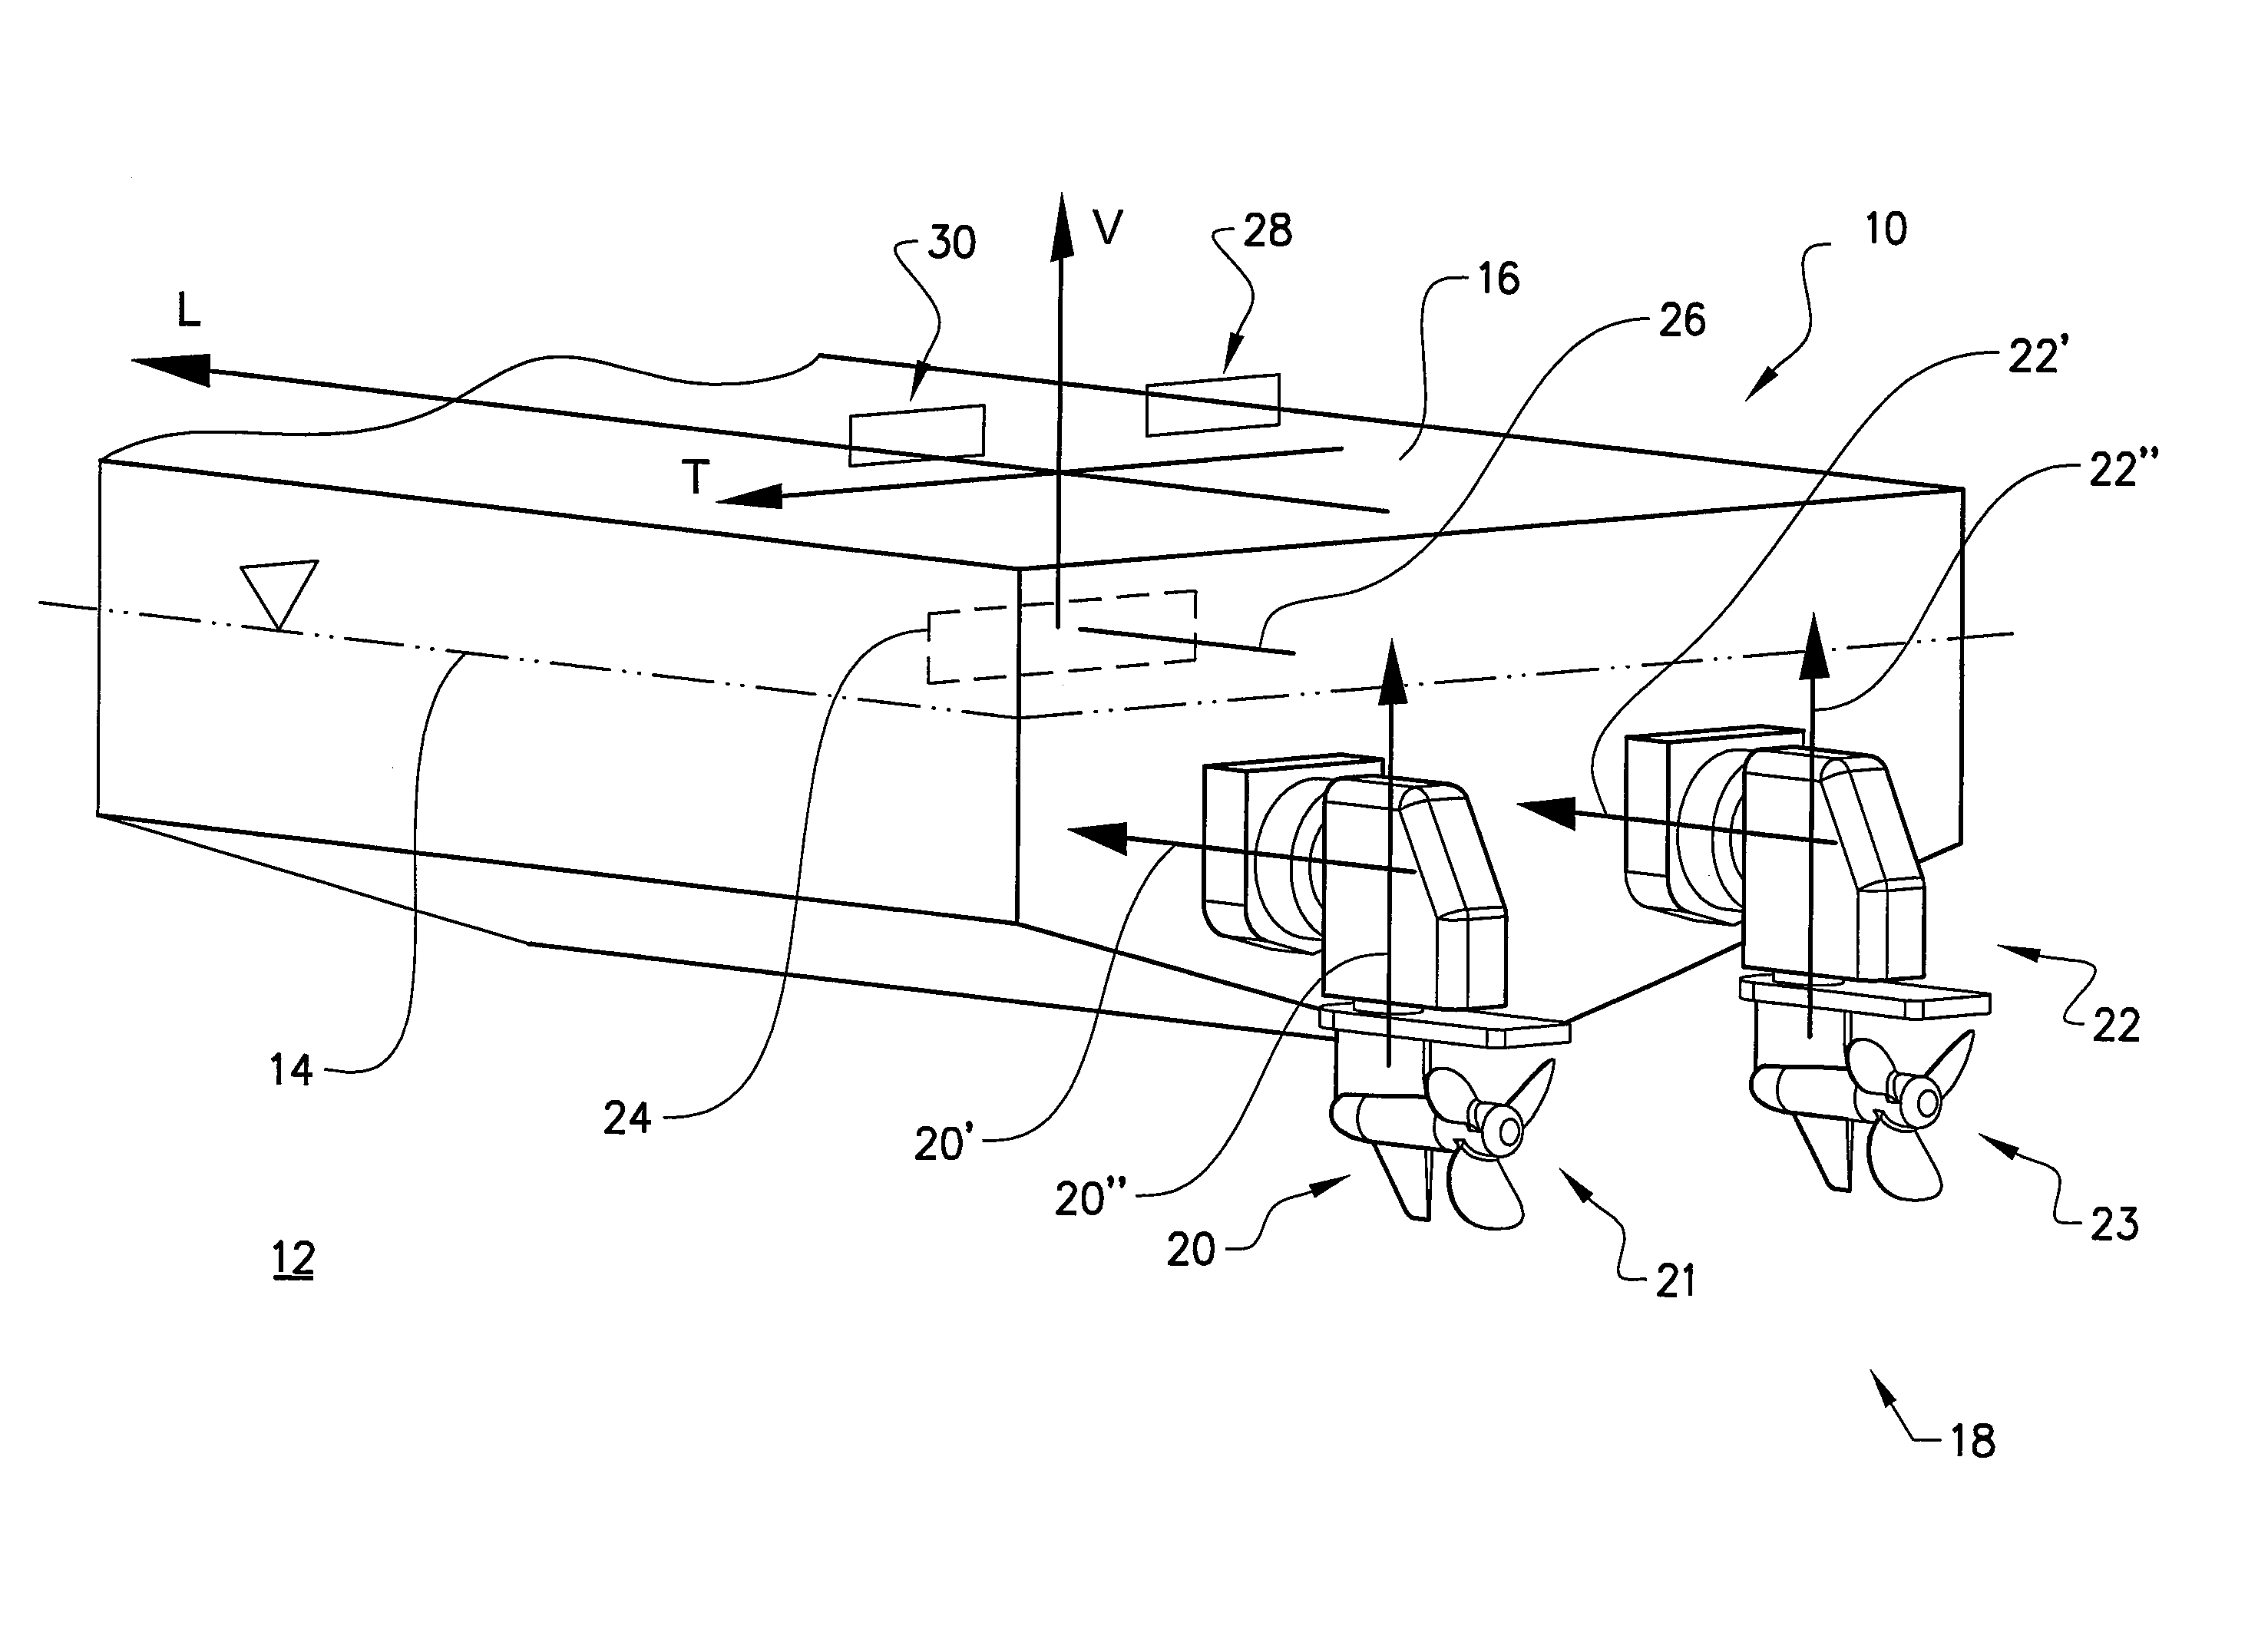 A method for controlling a boat comprising a pivotable drive unit, and a electronic vessel control unit for steering a boat